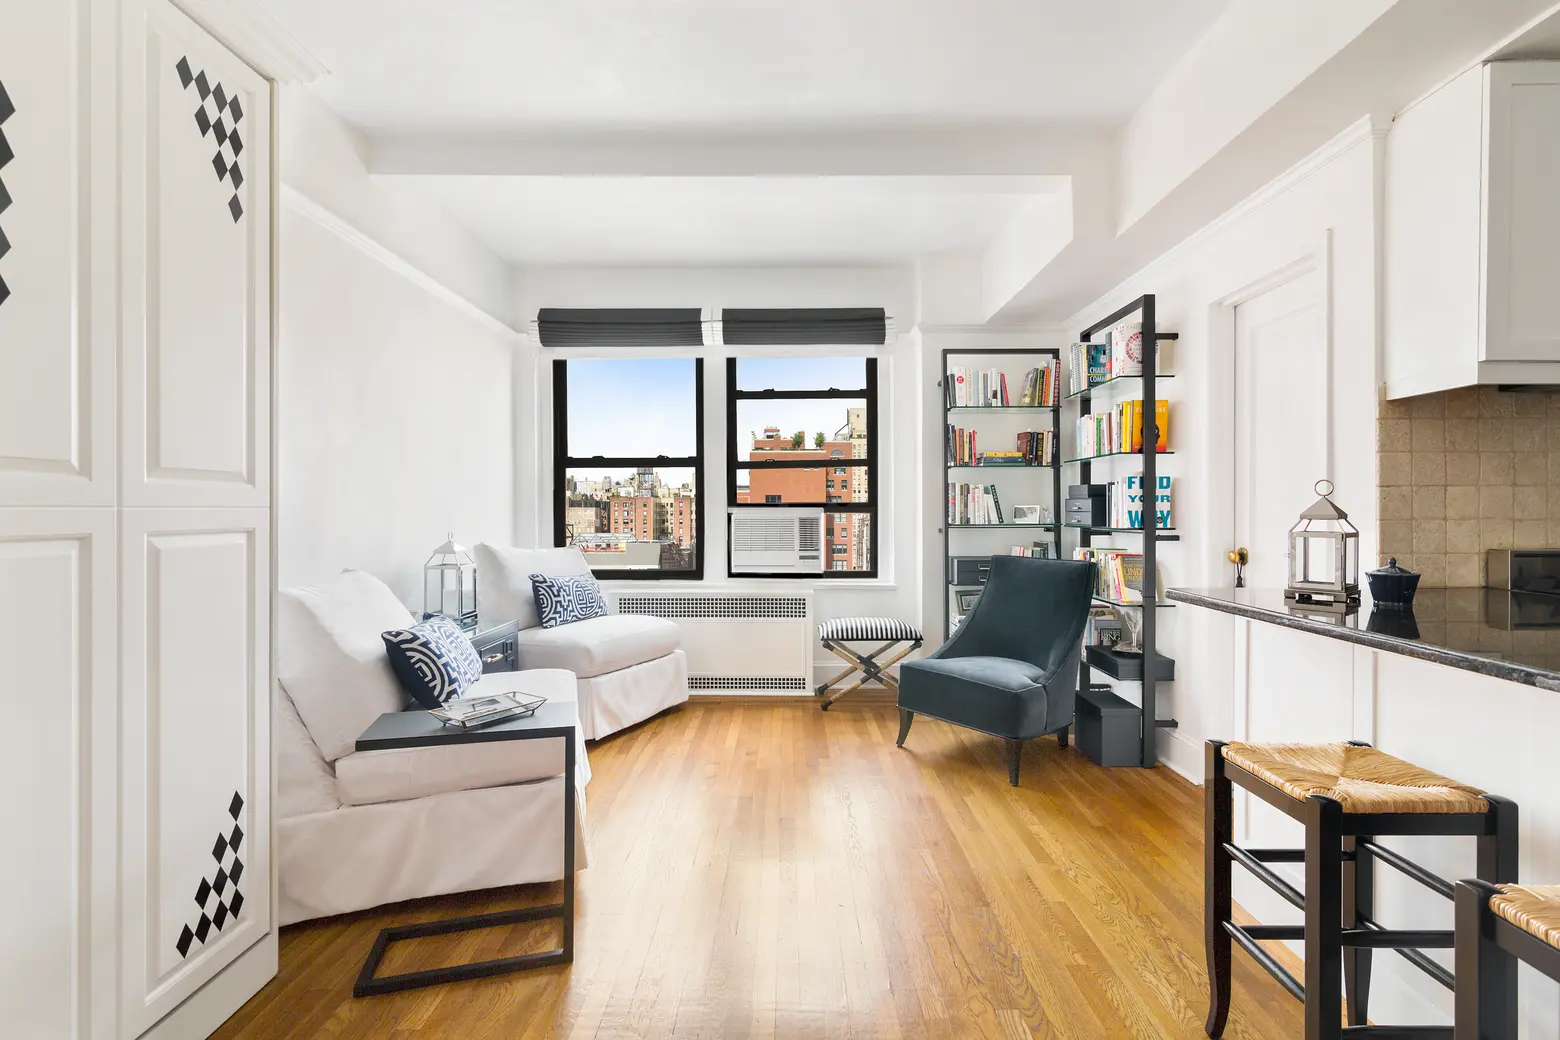 High-floor views come with a low ask of $395K in this refreshing Upper East Side studio